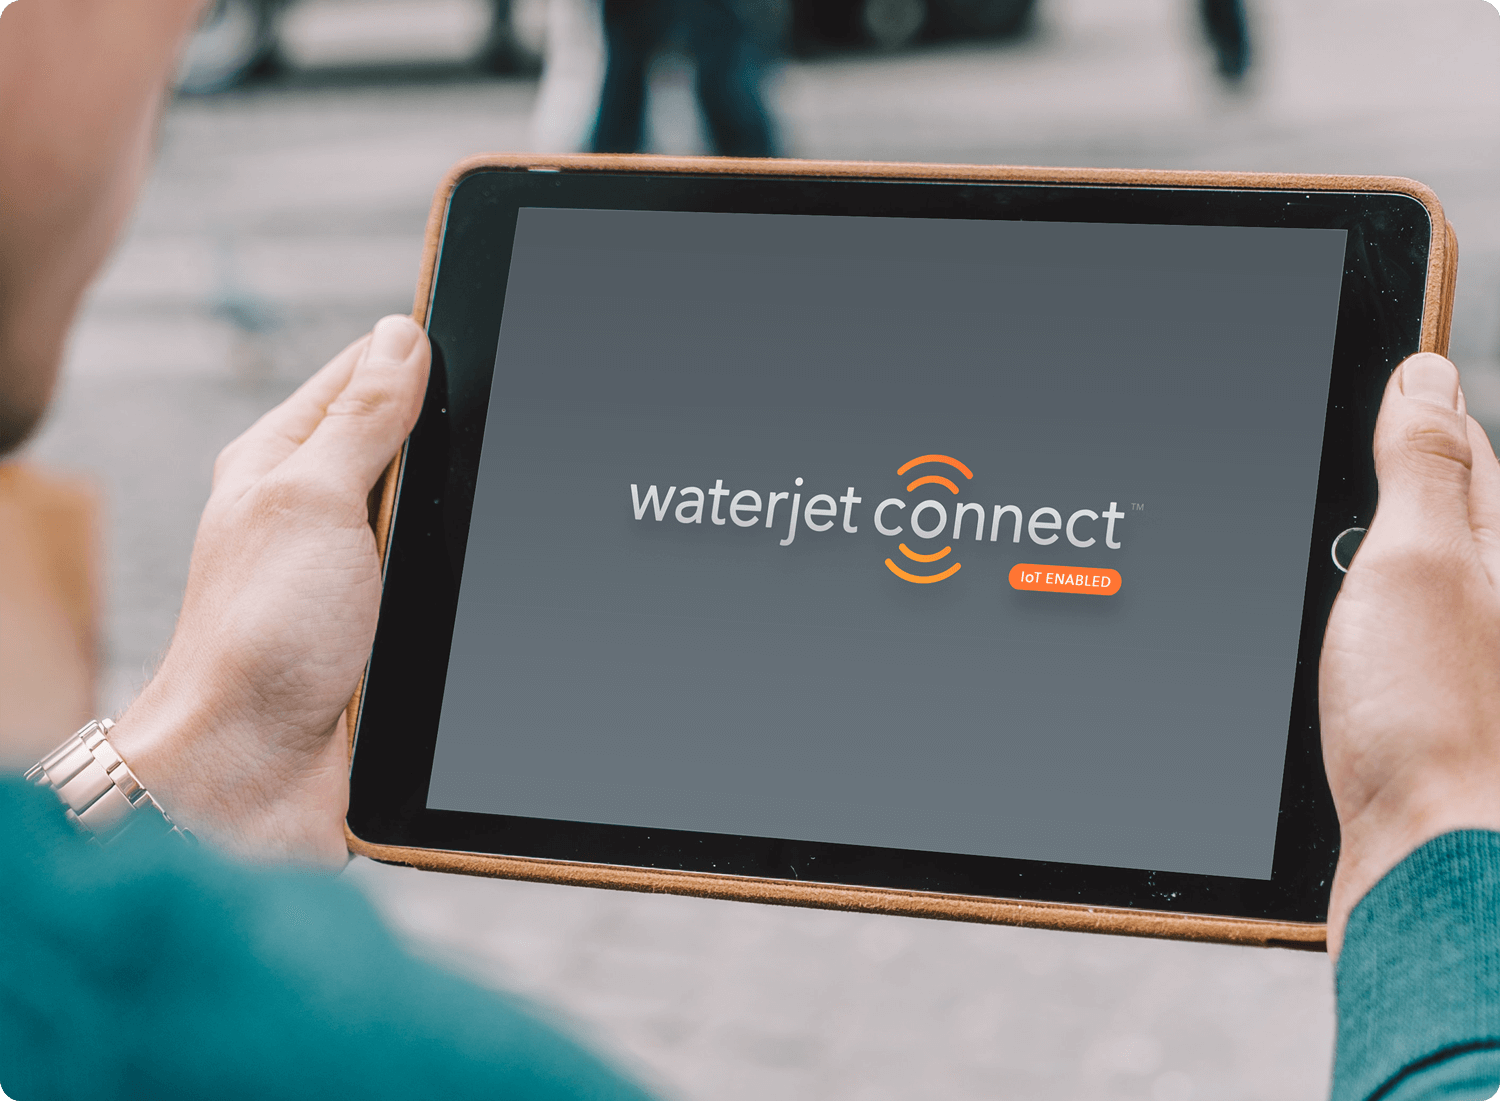 photo the Waterjet Connect logo on a tablet screen